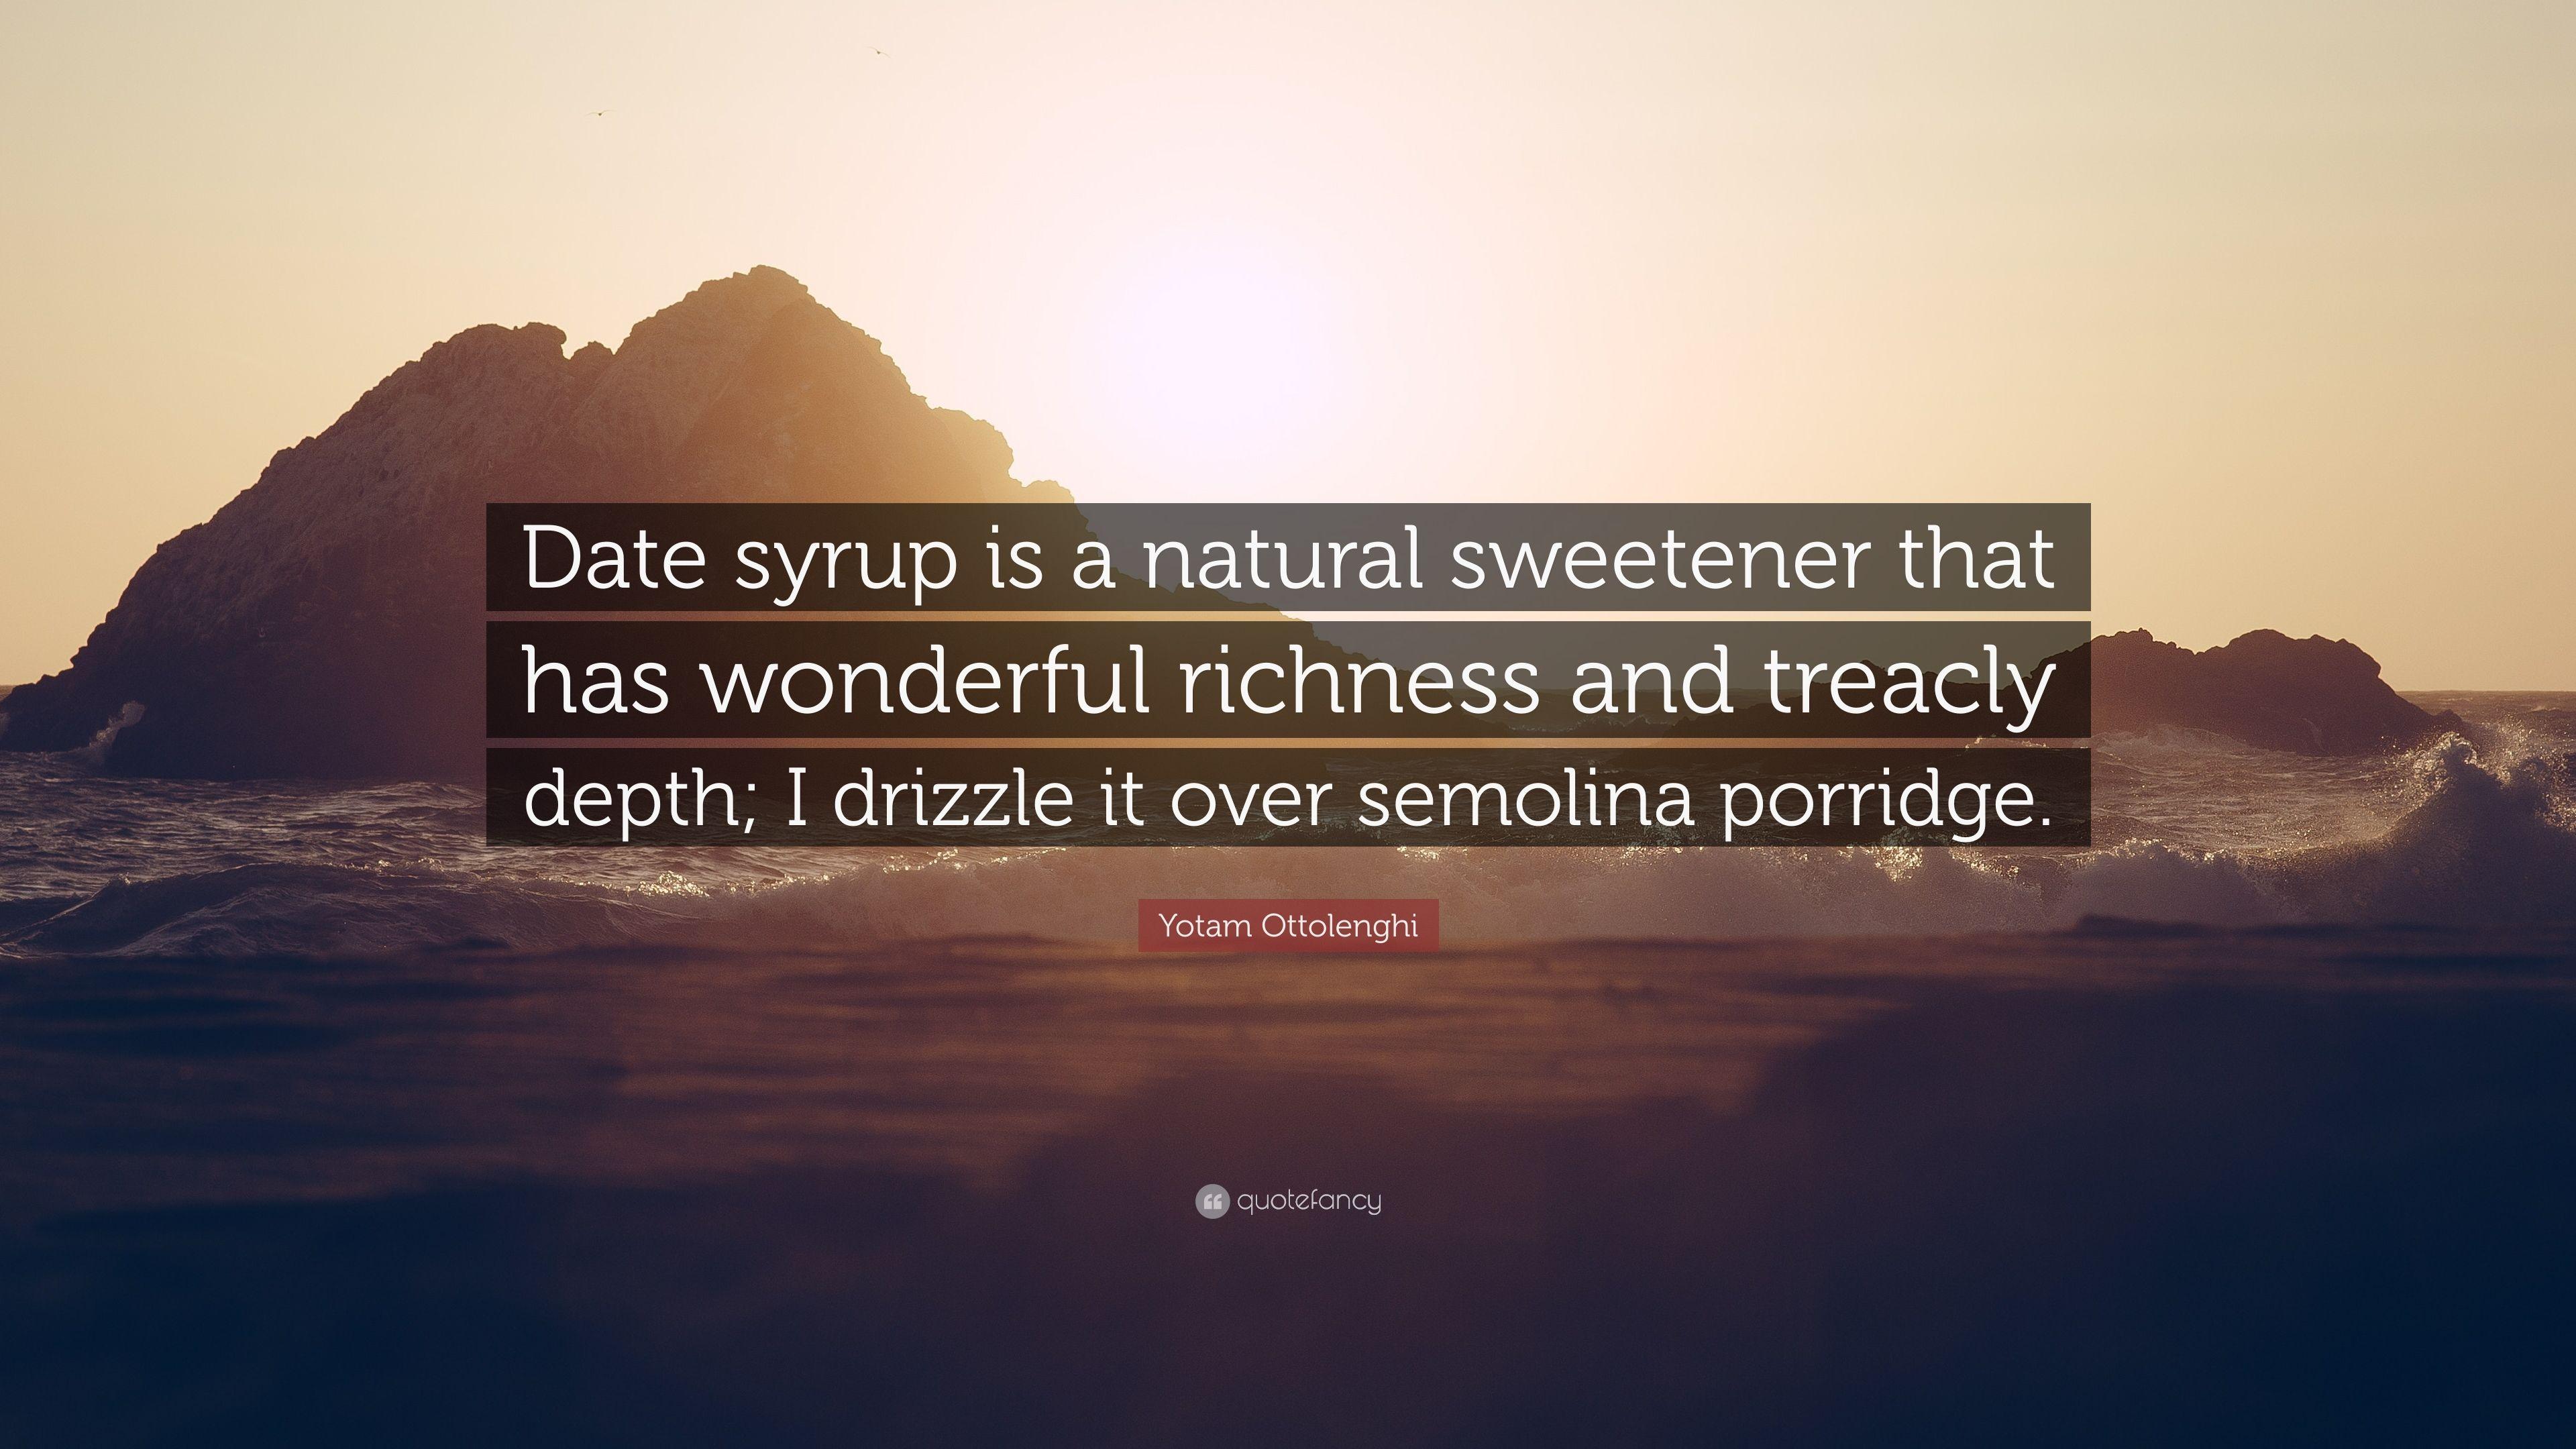 Yotam Ottolenghi Quote: “Date syrup is a natural sweetener that has